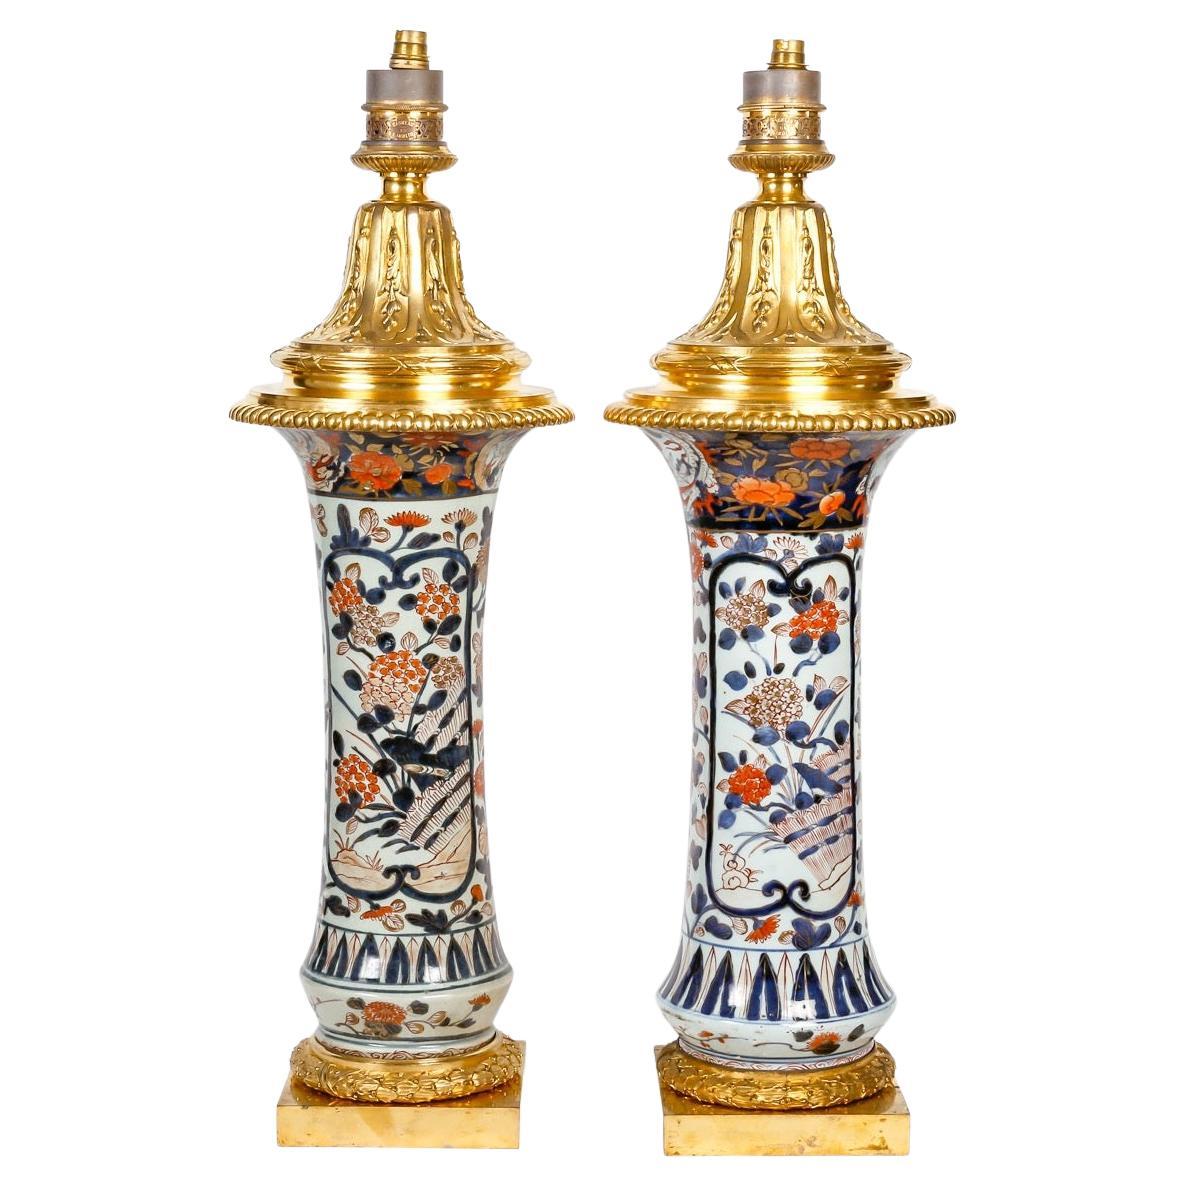 Pair of Porcelain Vases Ormolu-Mounted in Lamps by Gagneau Paris  XIXth Century For Sale